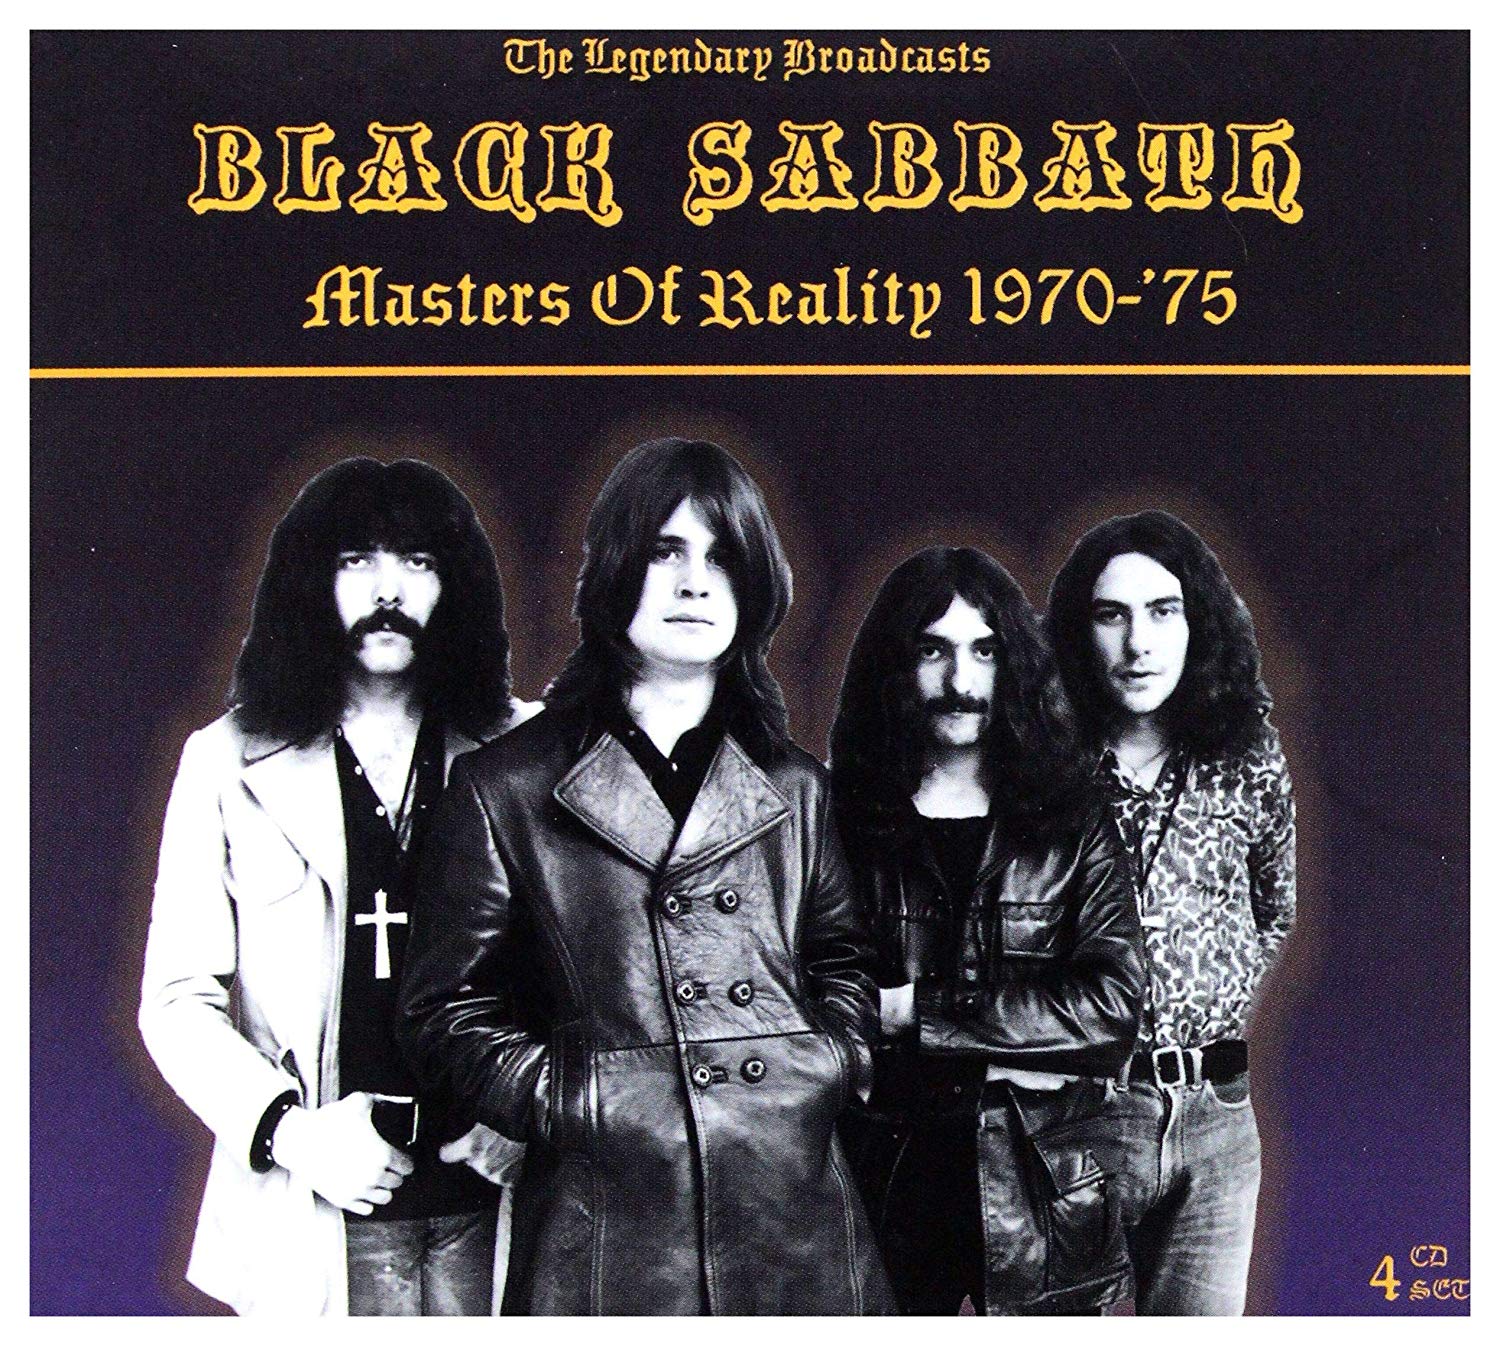 Masters of Reality 1970-75 the Legendary Broadcasts | Black Sabbath